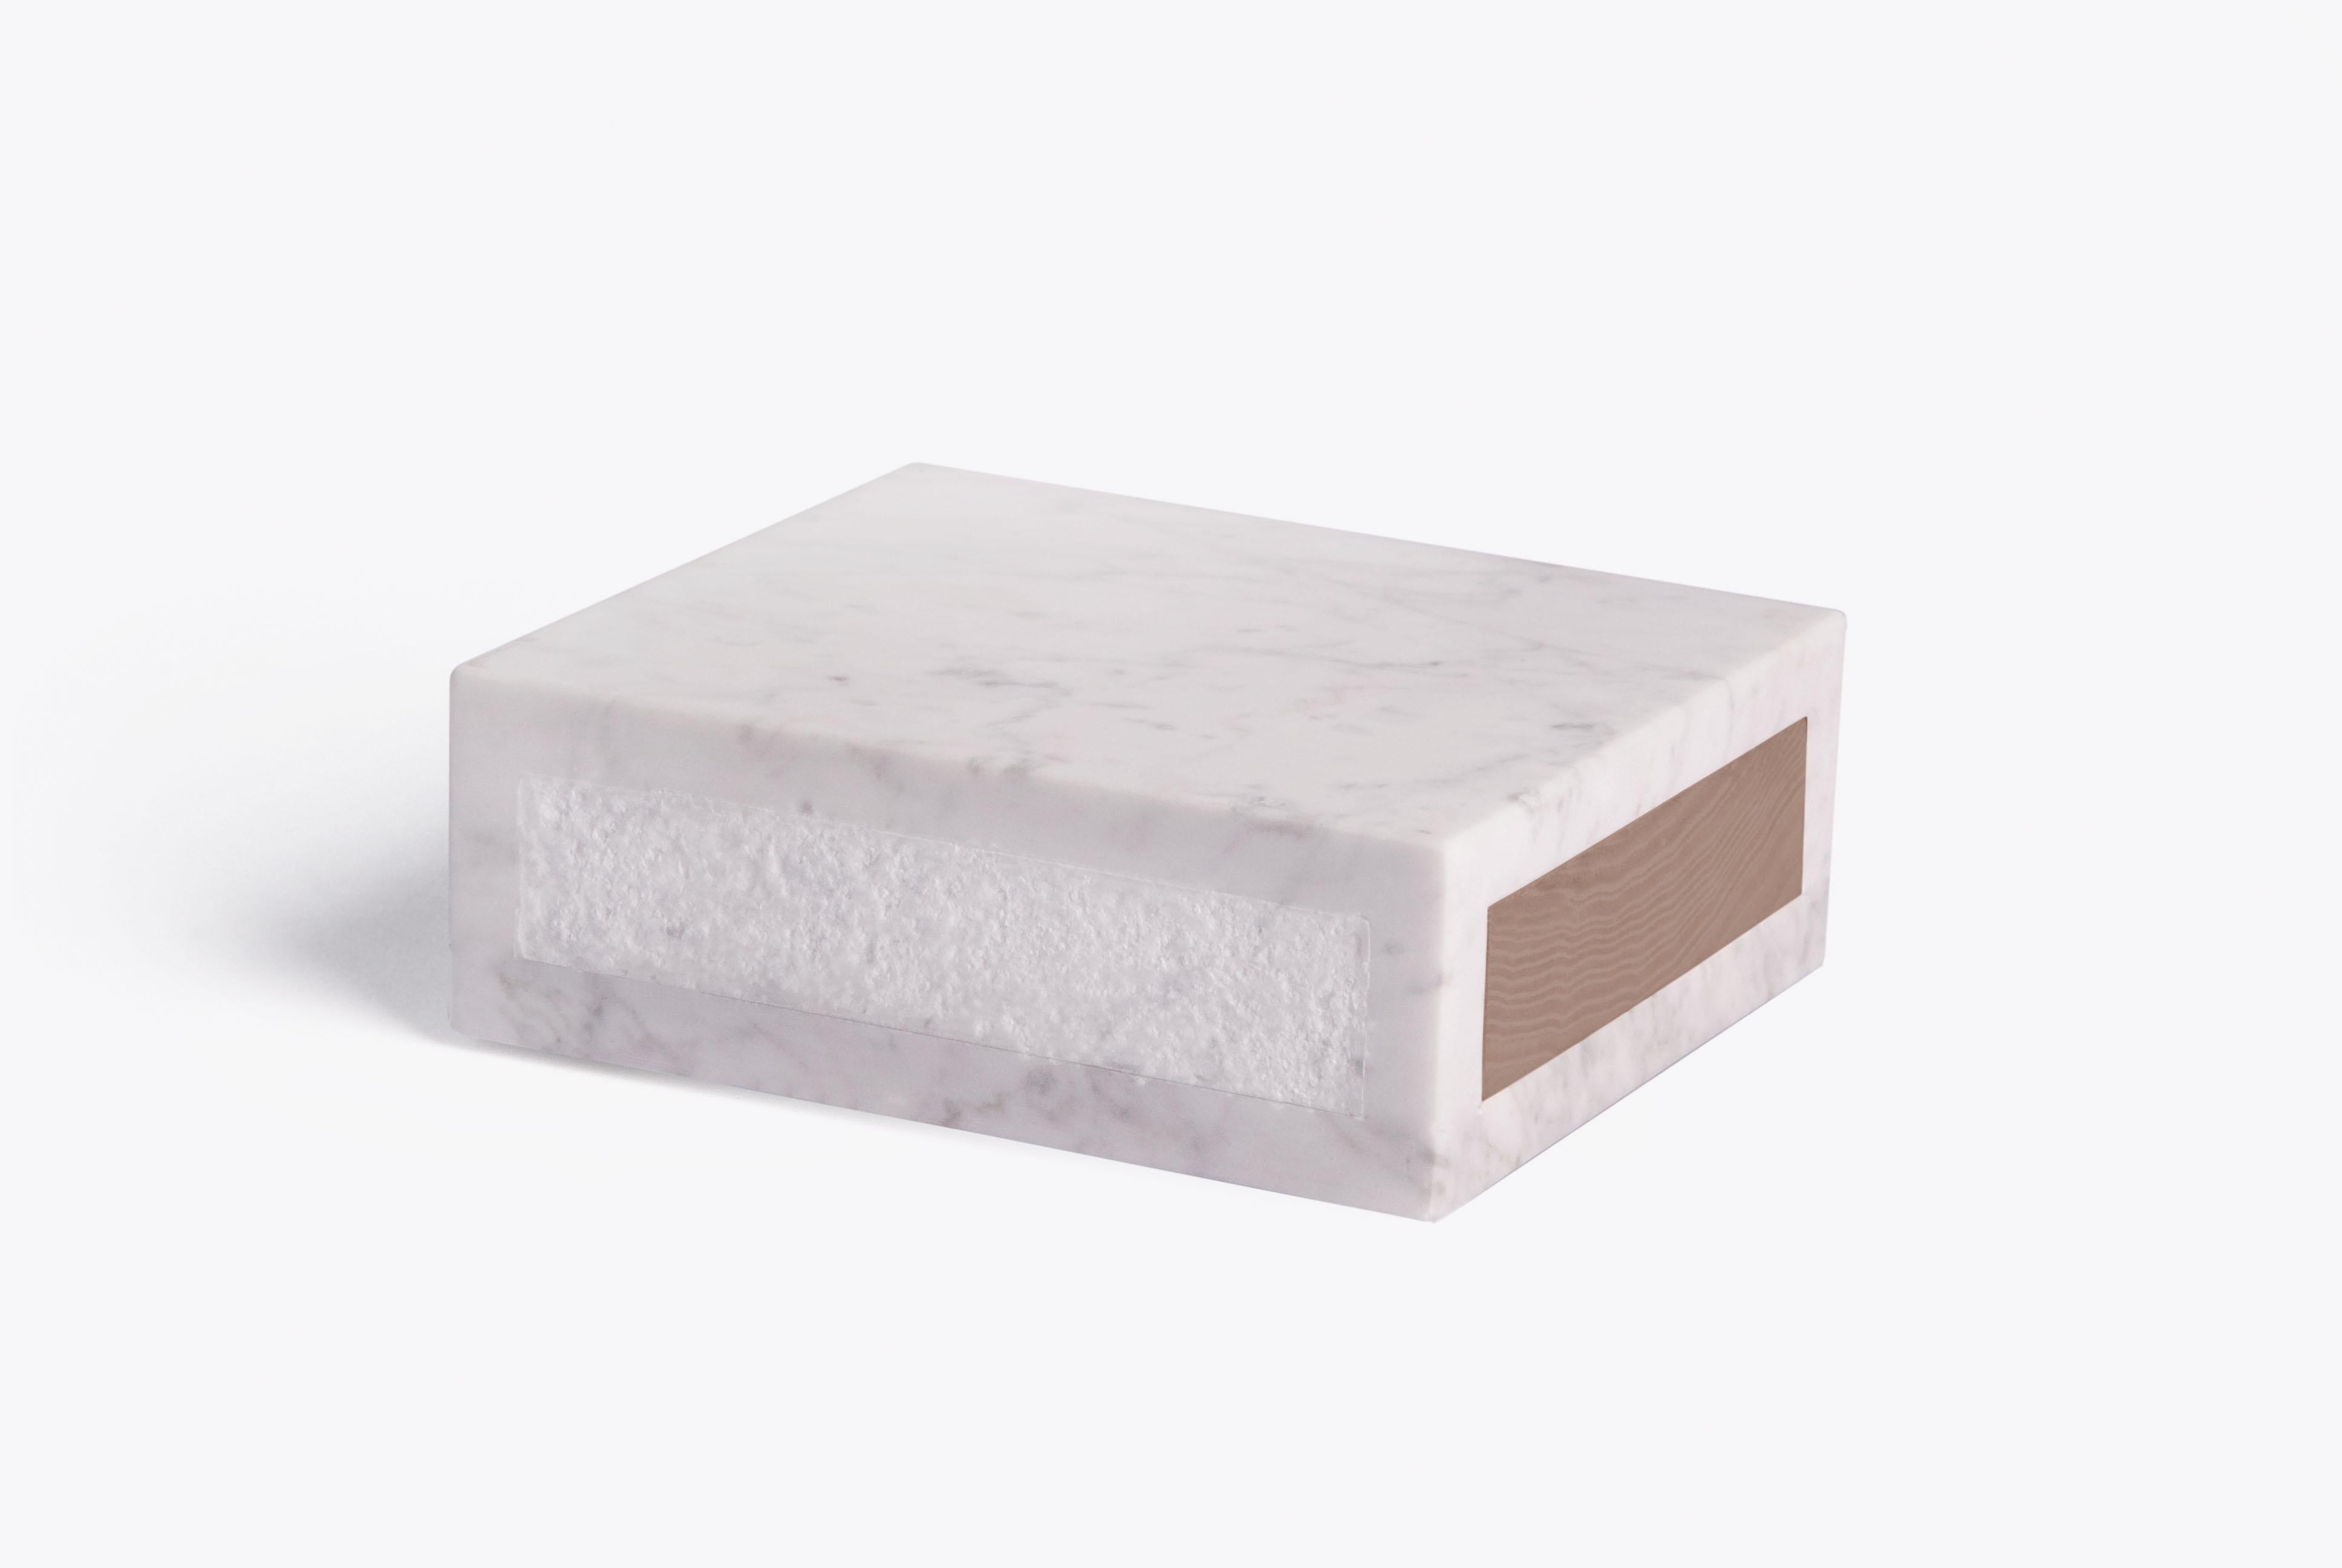 Comequandofuoripiove case + 2 decks of cards by Studio Lievito
Dimensions: D15 x W17 X H6 cm
Materials: bianco carrara marble, mohogany wood.
Weight: 2.6 kg

A reference to one of the most characteristic uses of marble and to the territory of origin